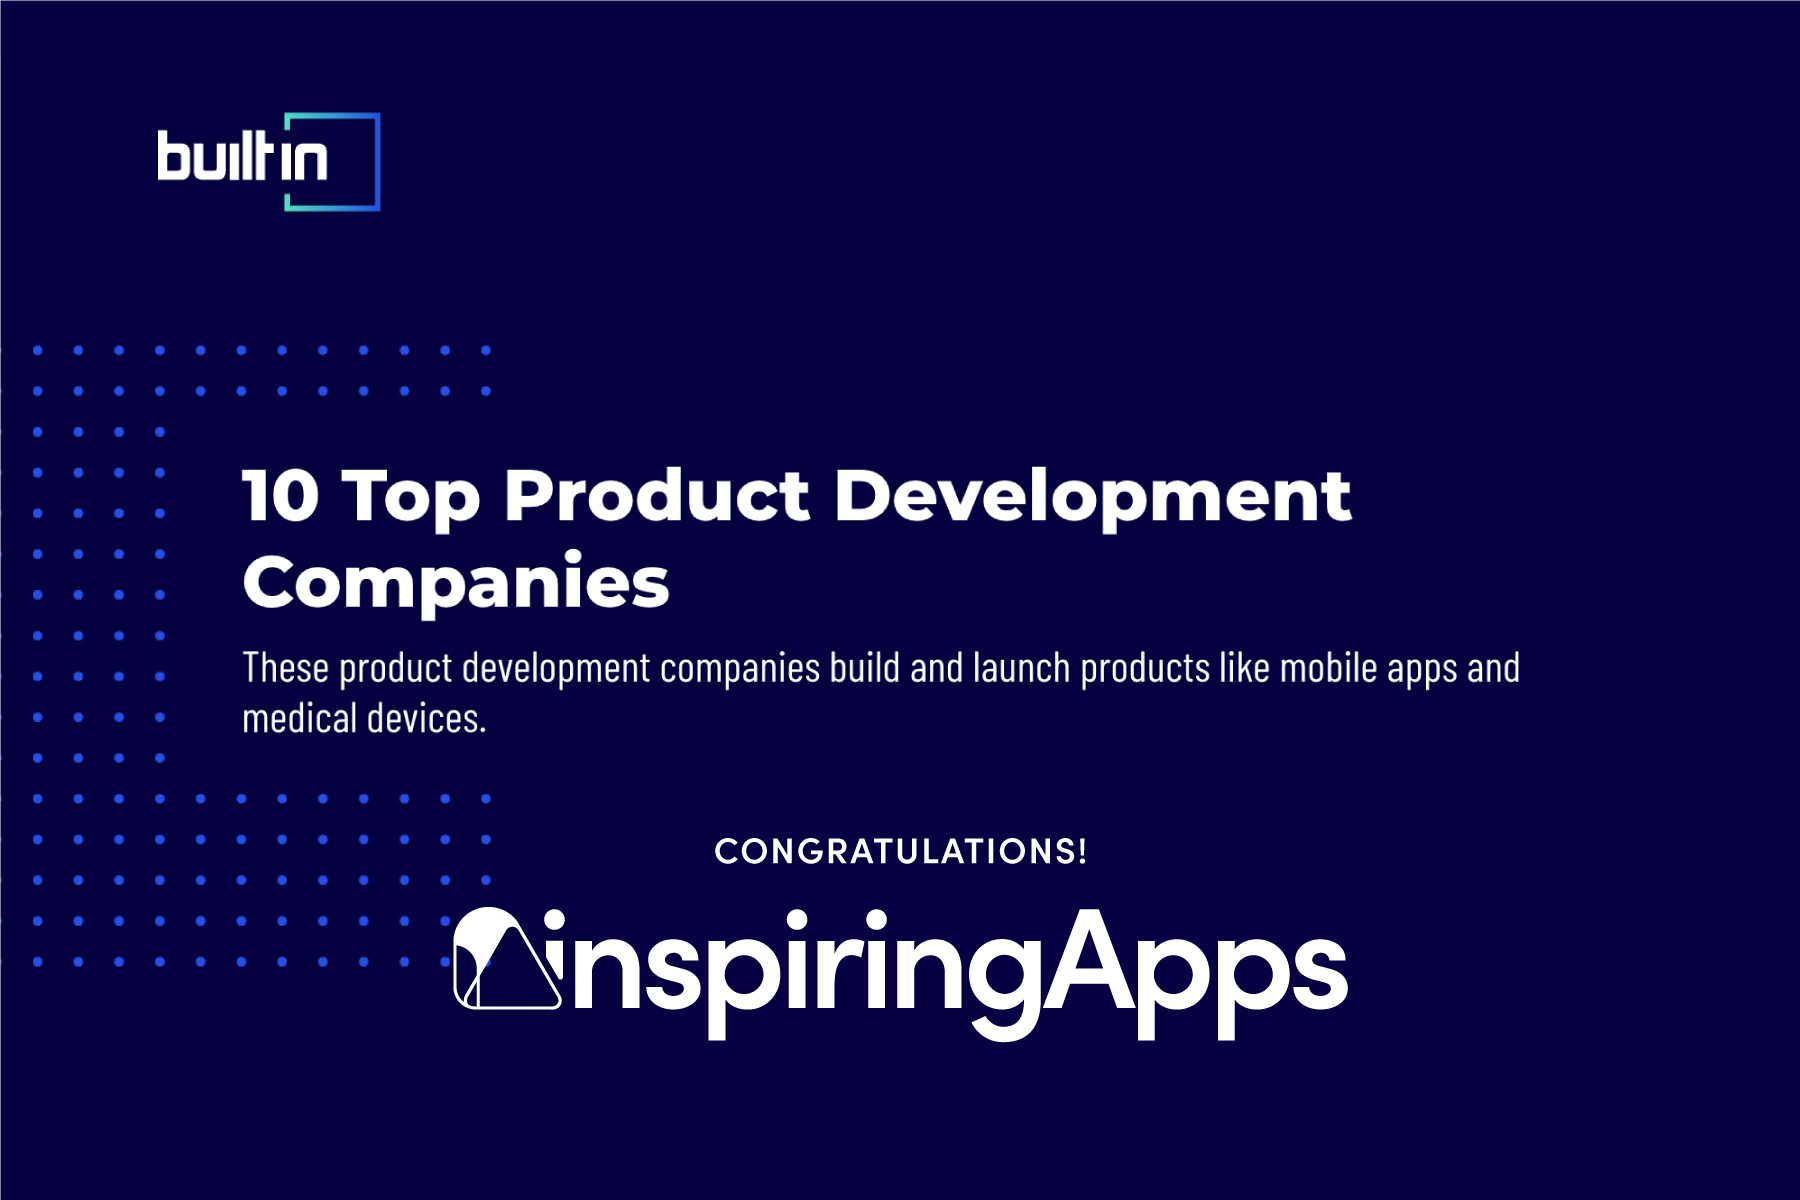 InspiringApps Recognized as a Top Product Development Company by Built In Image